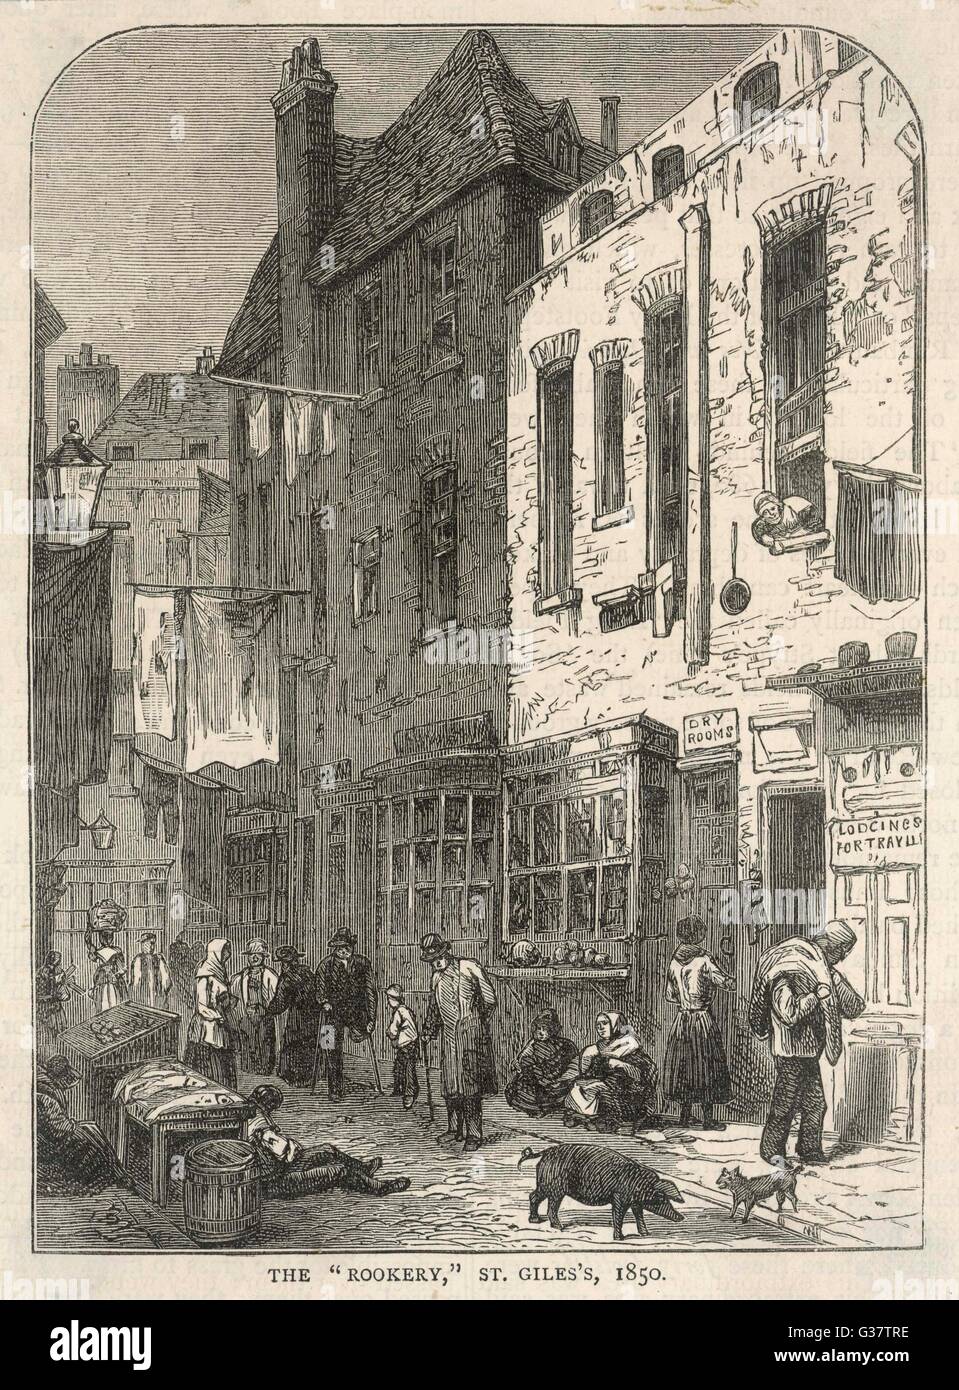 A notorious London slum -  the 'Rookery' of St Giles,  near Seven Dials, where even  the police were at risk       Date: circa 1850 Stock Photo